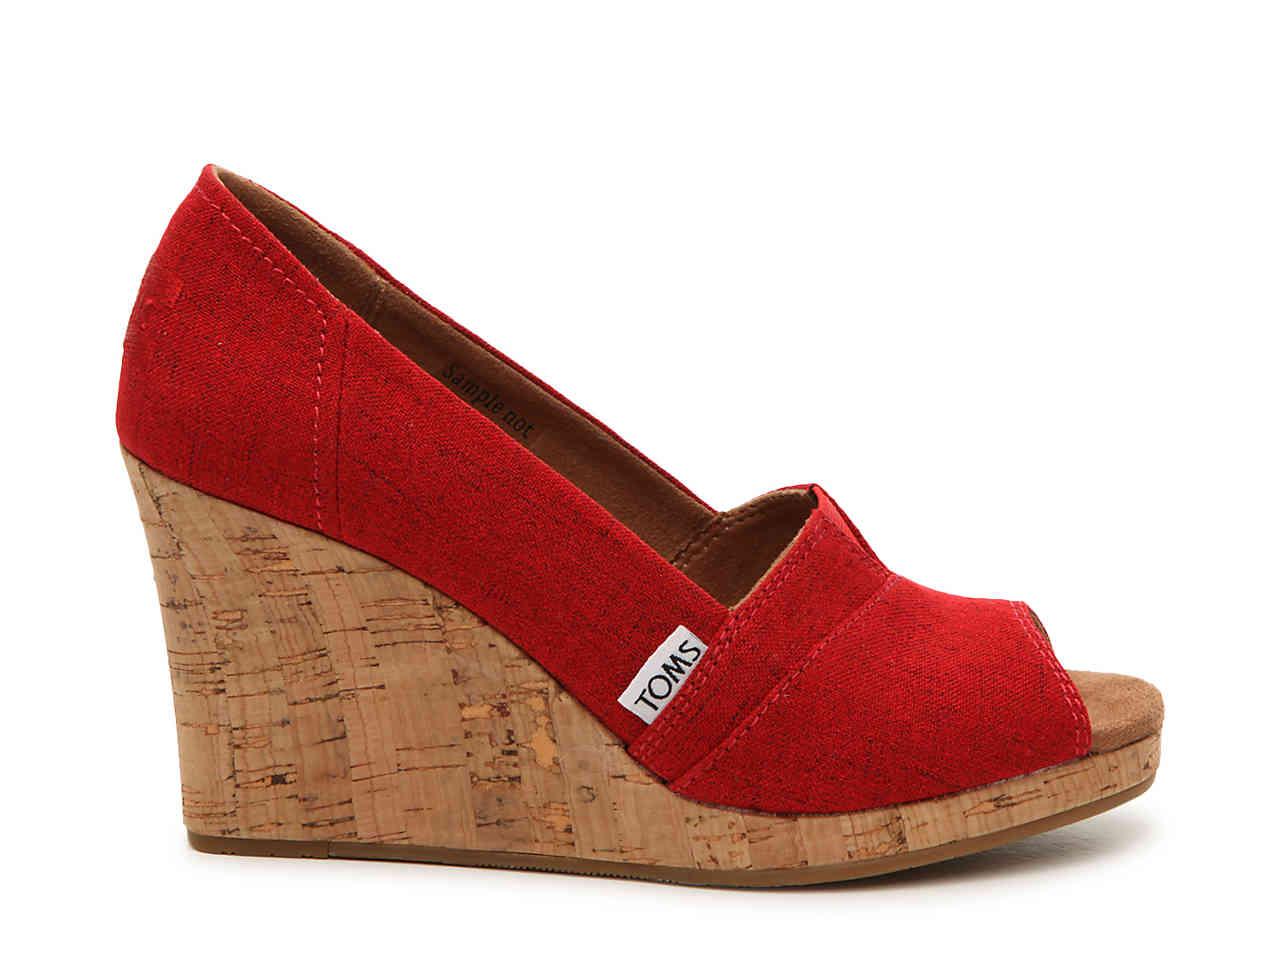 TOMS Canvas Classic Wedge Pump in Red - Lyst